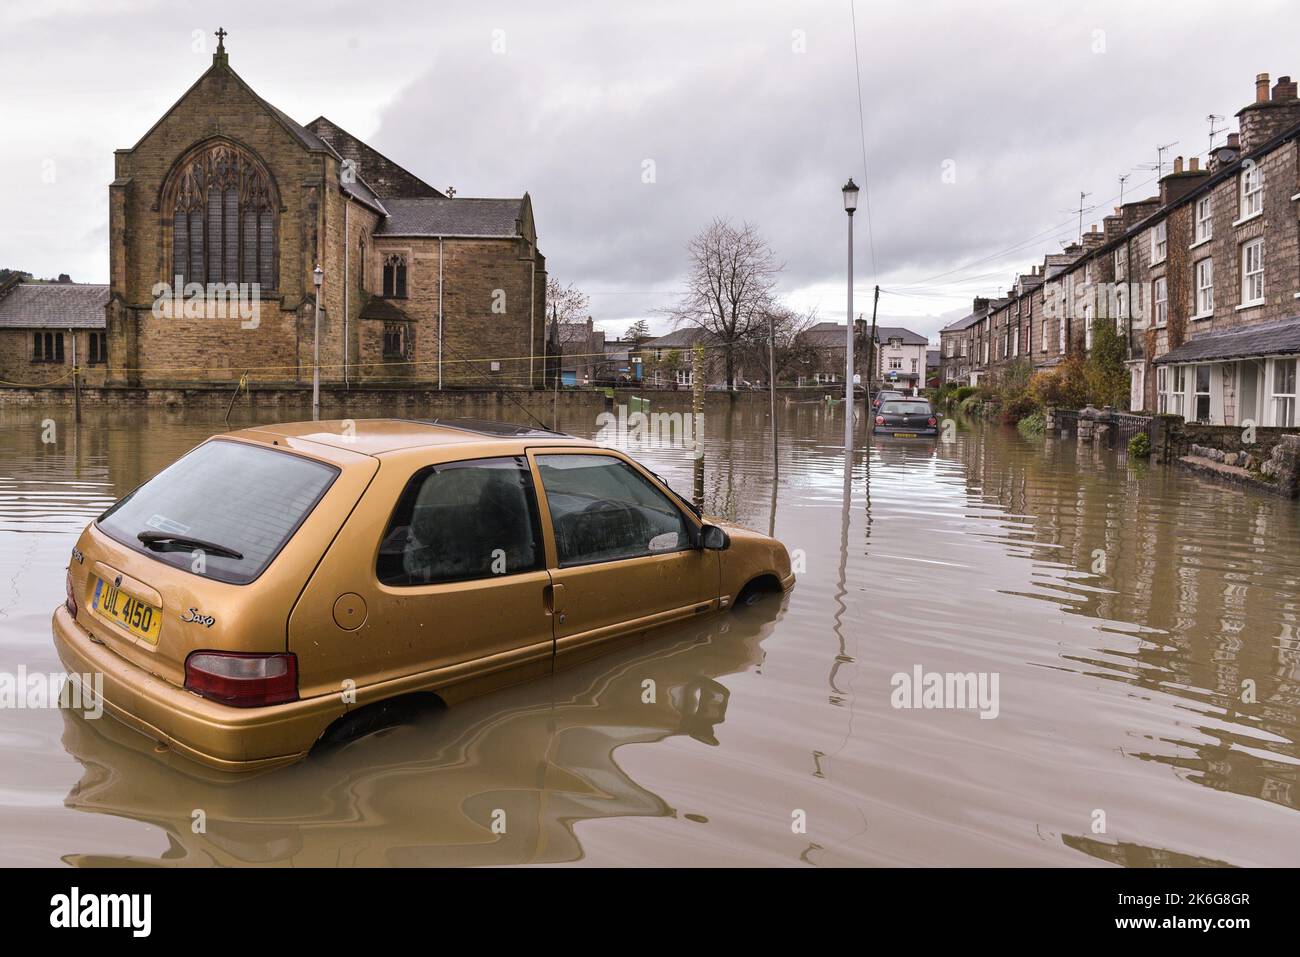 Kendal, Cumbria - December 6th 2015 - Flooded vehicles in Kendal, Cumbria on the 6th of December 2015 after Storm Desmond. Pic Credit: Scott CM/Alamy Live News Stock Photo